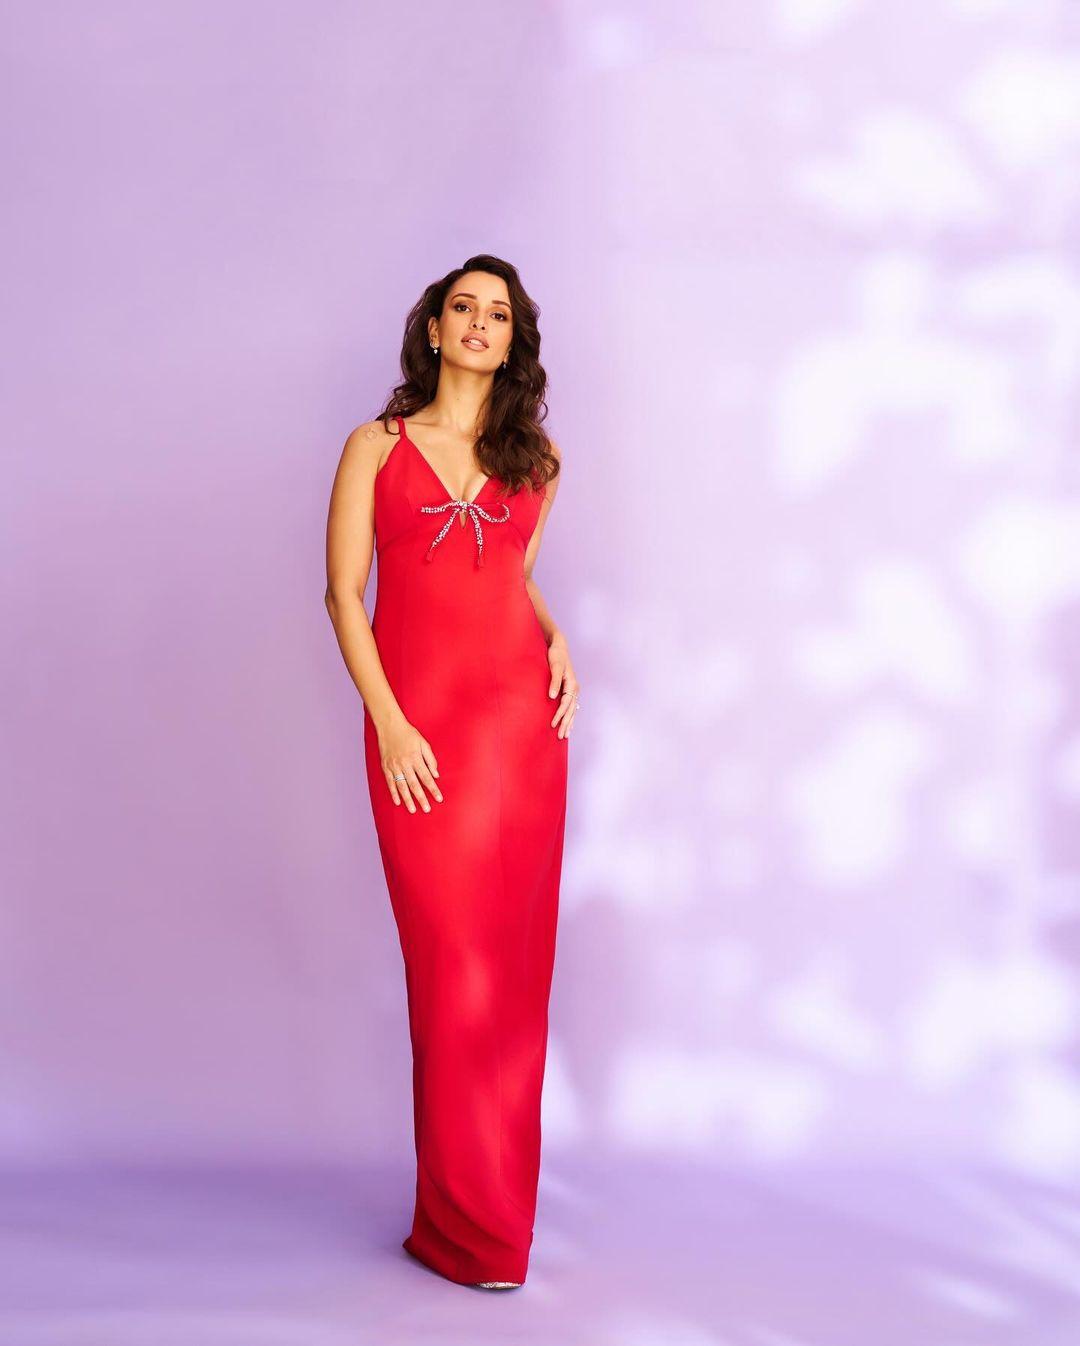 Perfect for Christmas, Triptii donned this floor-length red dress that made everyone's jaw drop